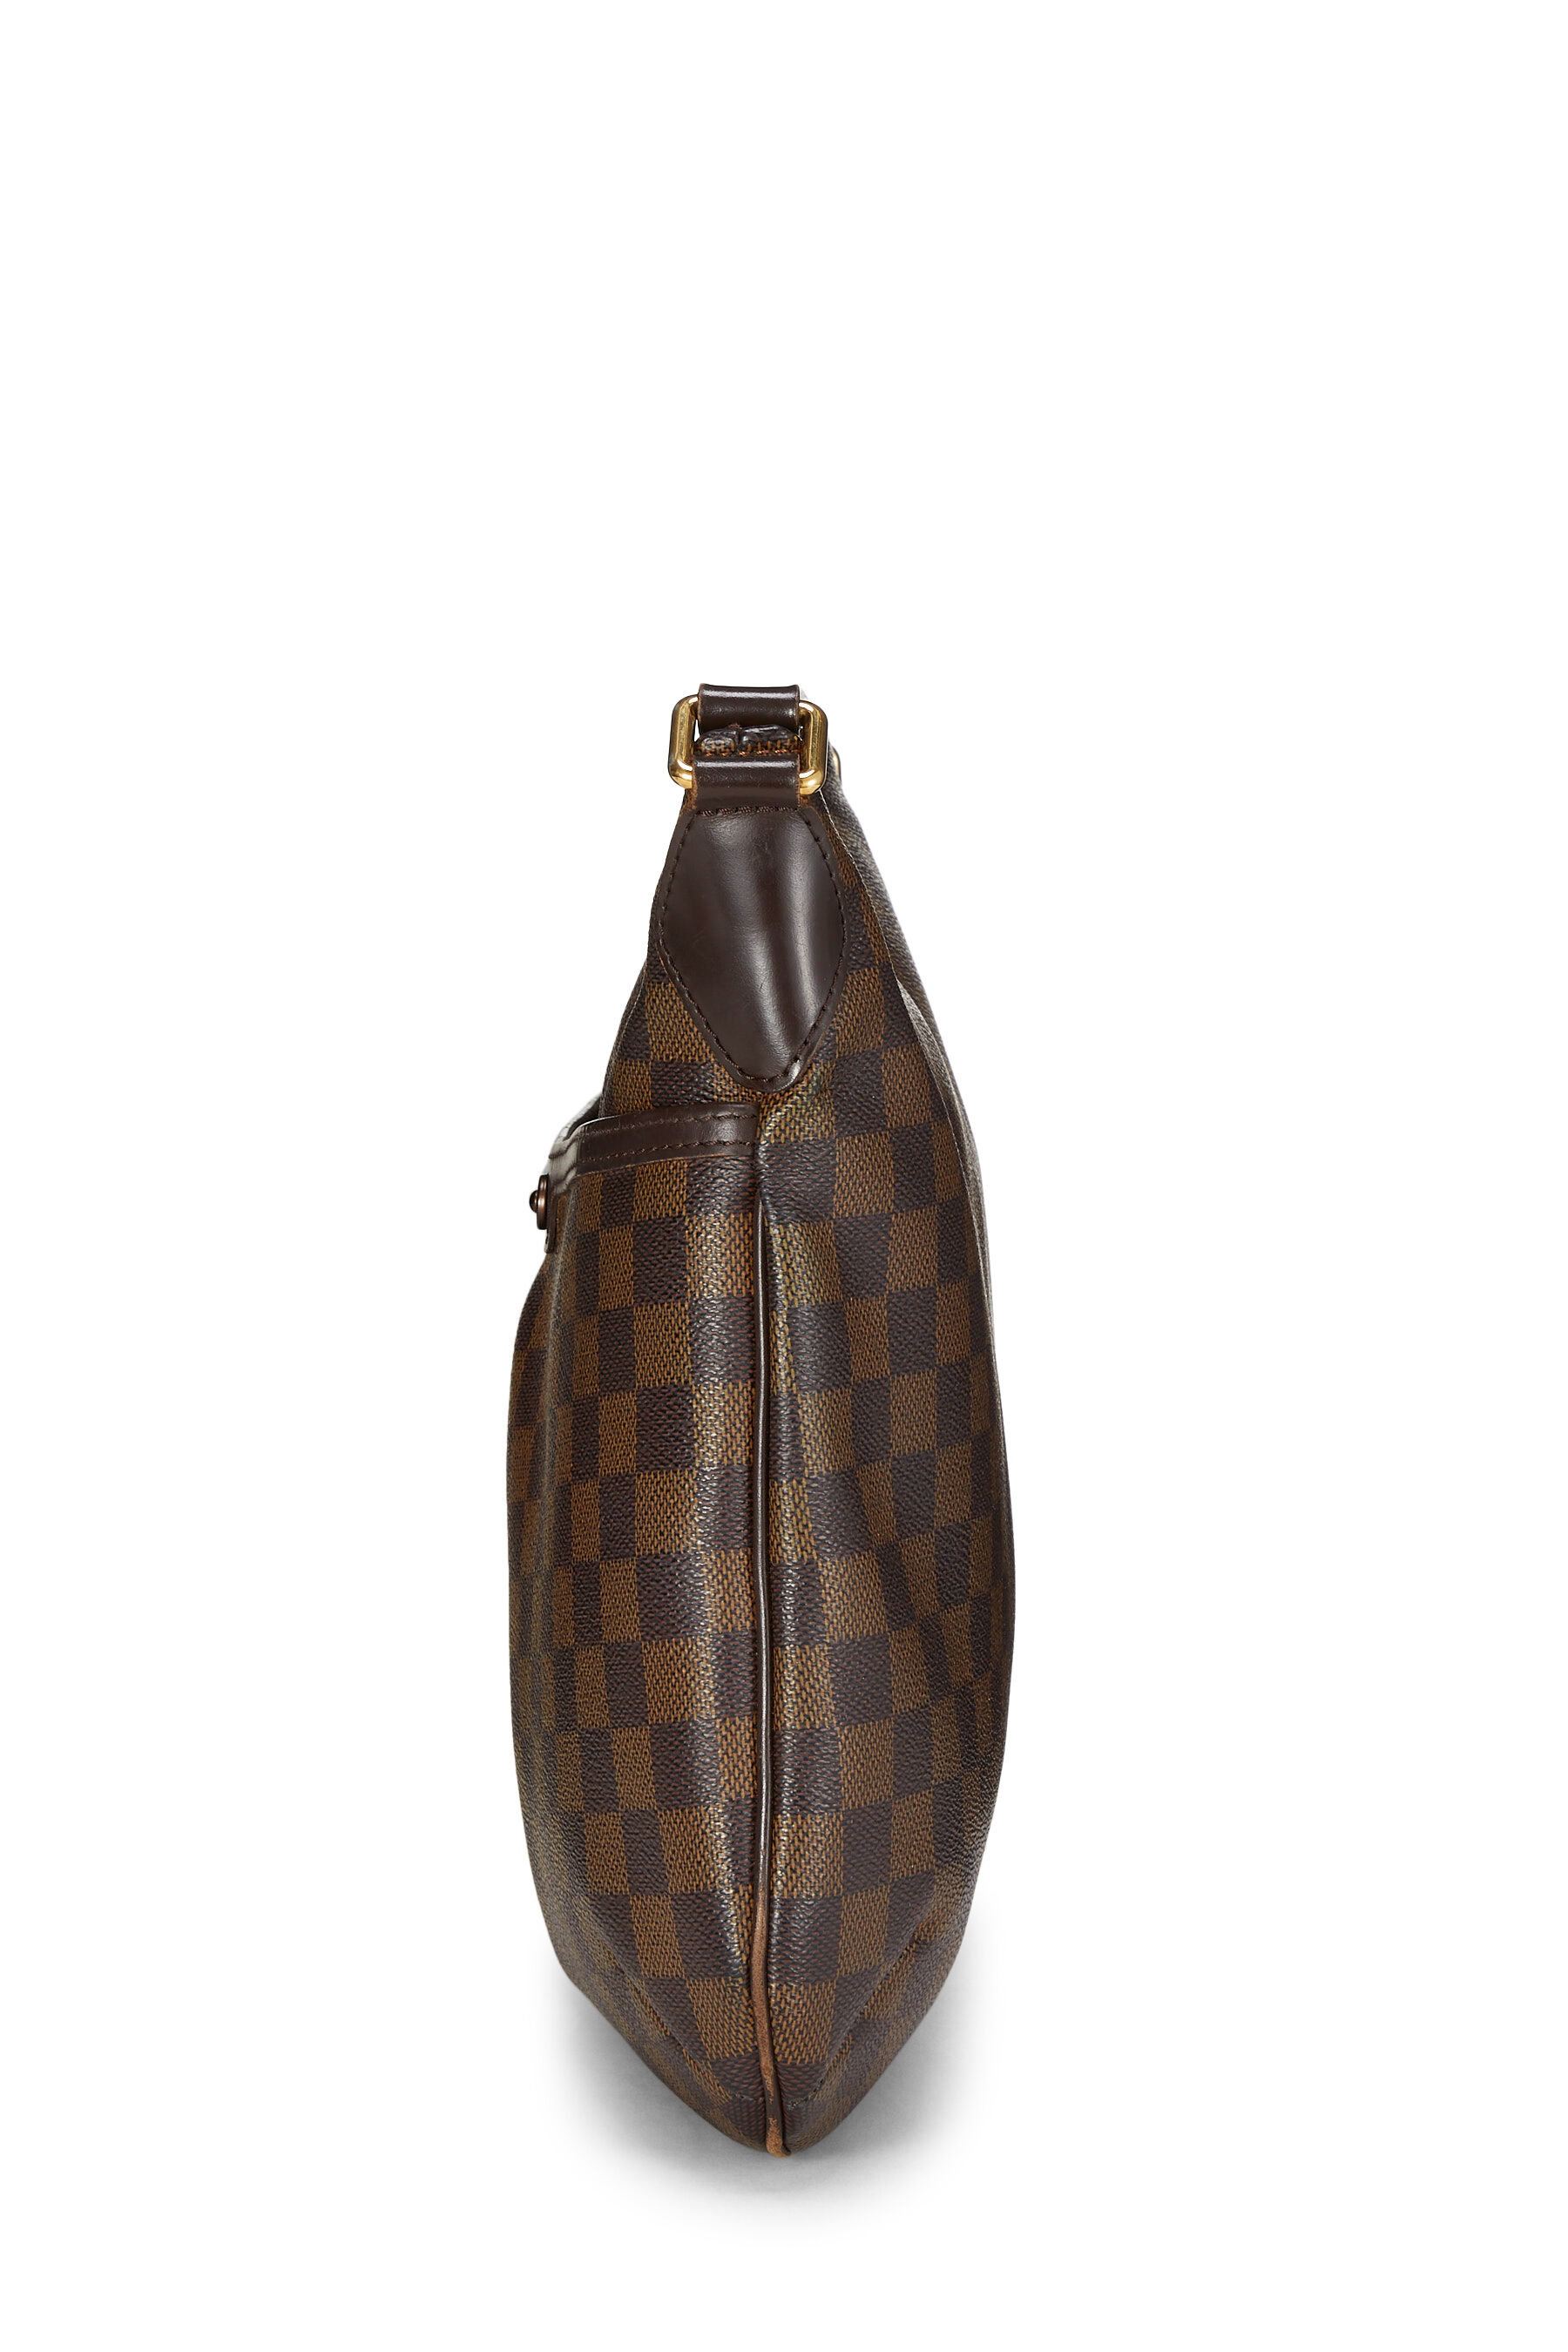 Louis Vuitton Damier Ebene Bloomsbury PM - A World Of Goods For